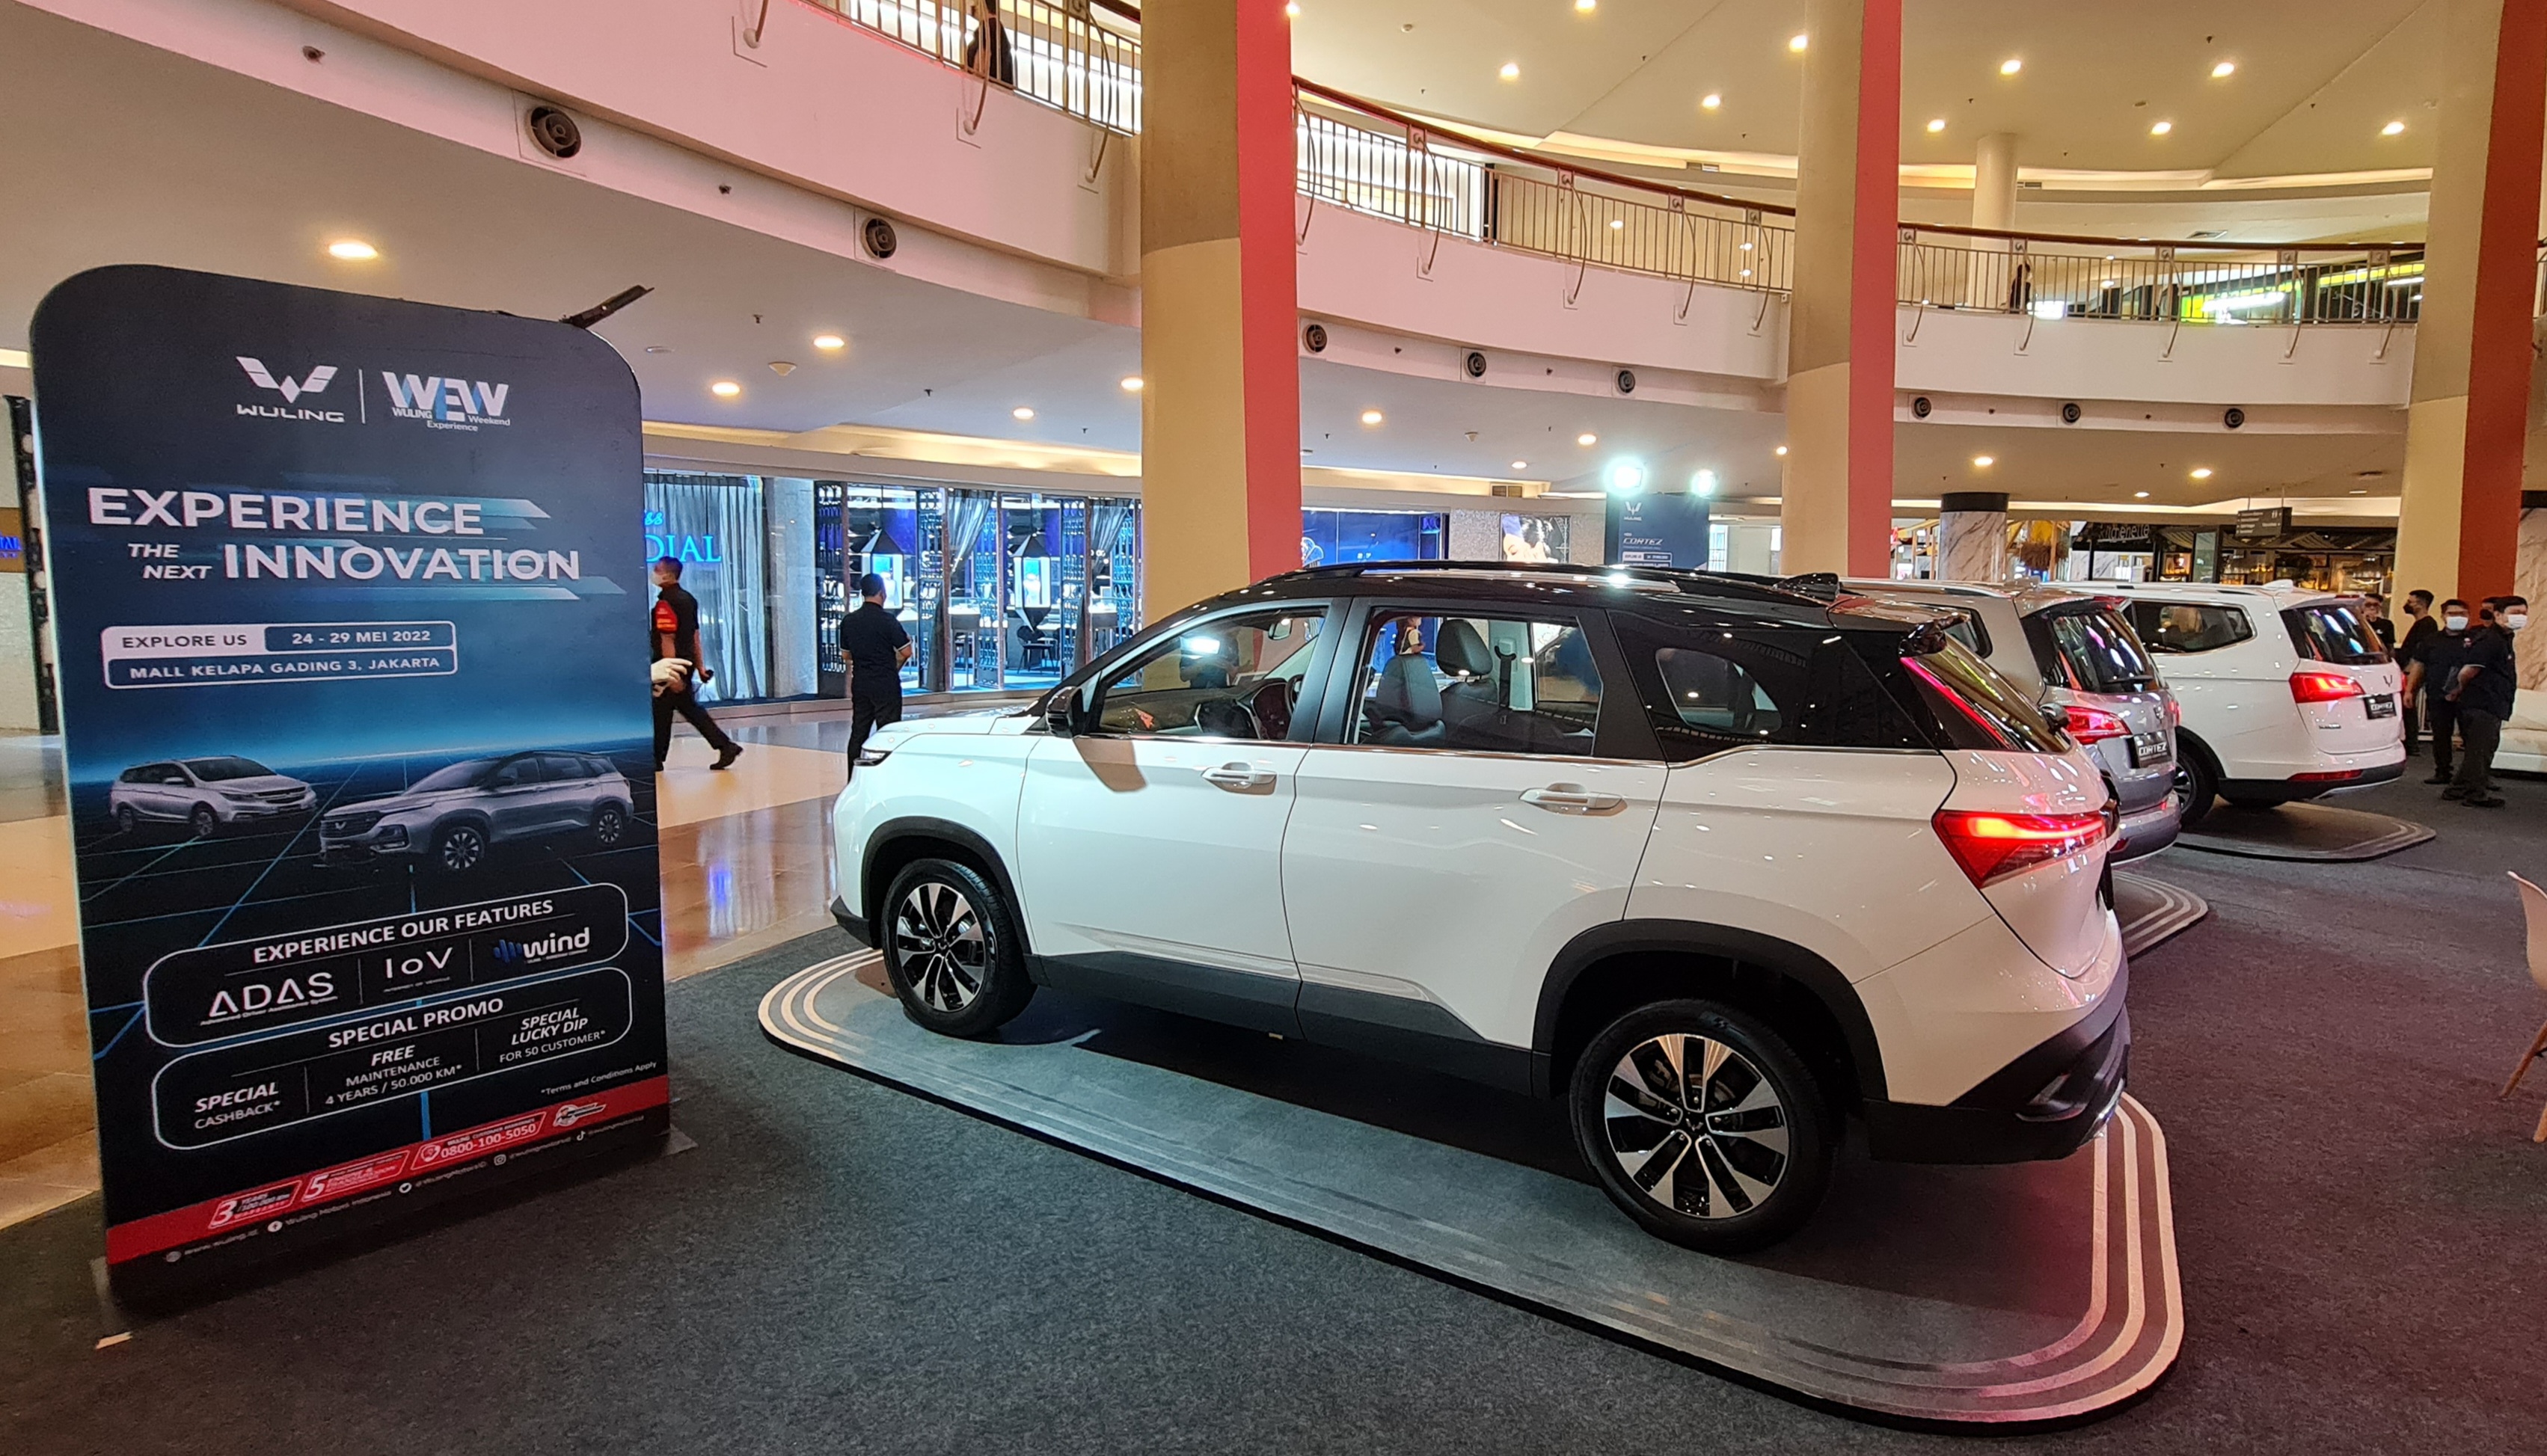 Image Wuling Experience Weekend: Experience the Next Innovation, Mulai Digelar di Jakarta